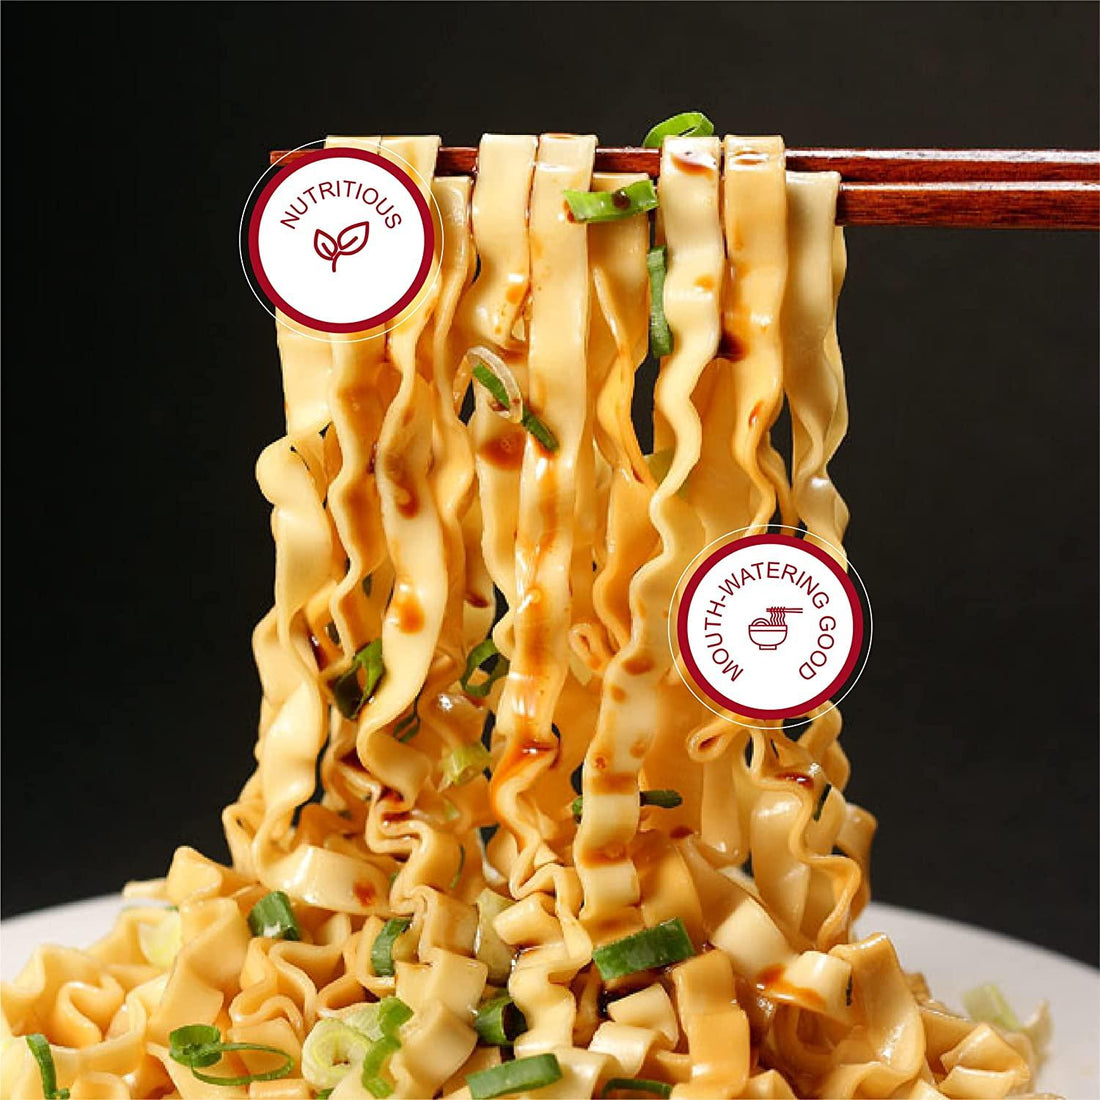 A-SHA, Noodles With Chili Sauce 3.38oz(96g) x 5 Packs - Anytime Basket